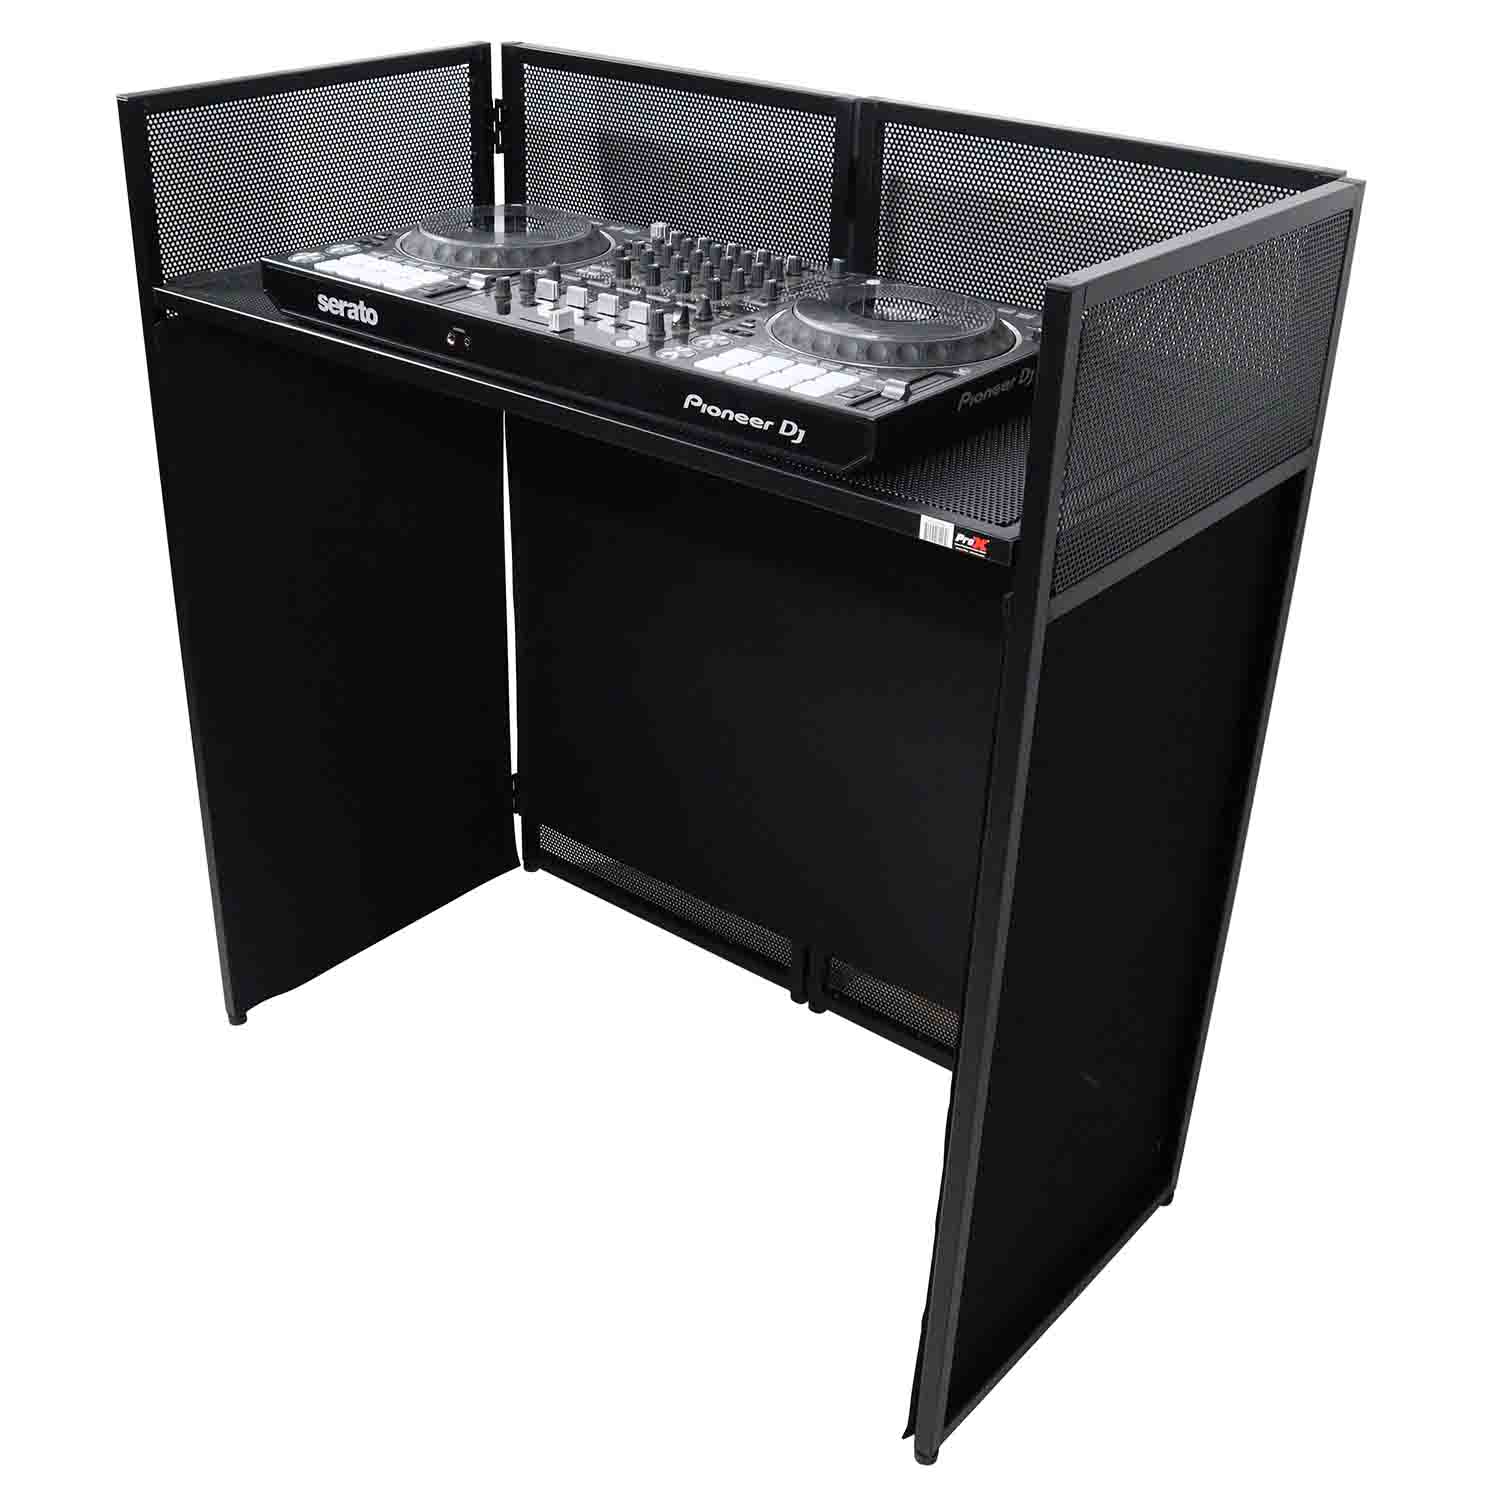 ProX XF-VISTA BL VISTA DJ Booth Facade Table Station with White/Black Scrim kit and Padded Travel Bag - Hollywood DJ